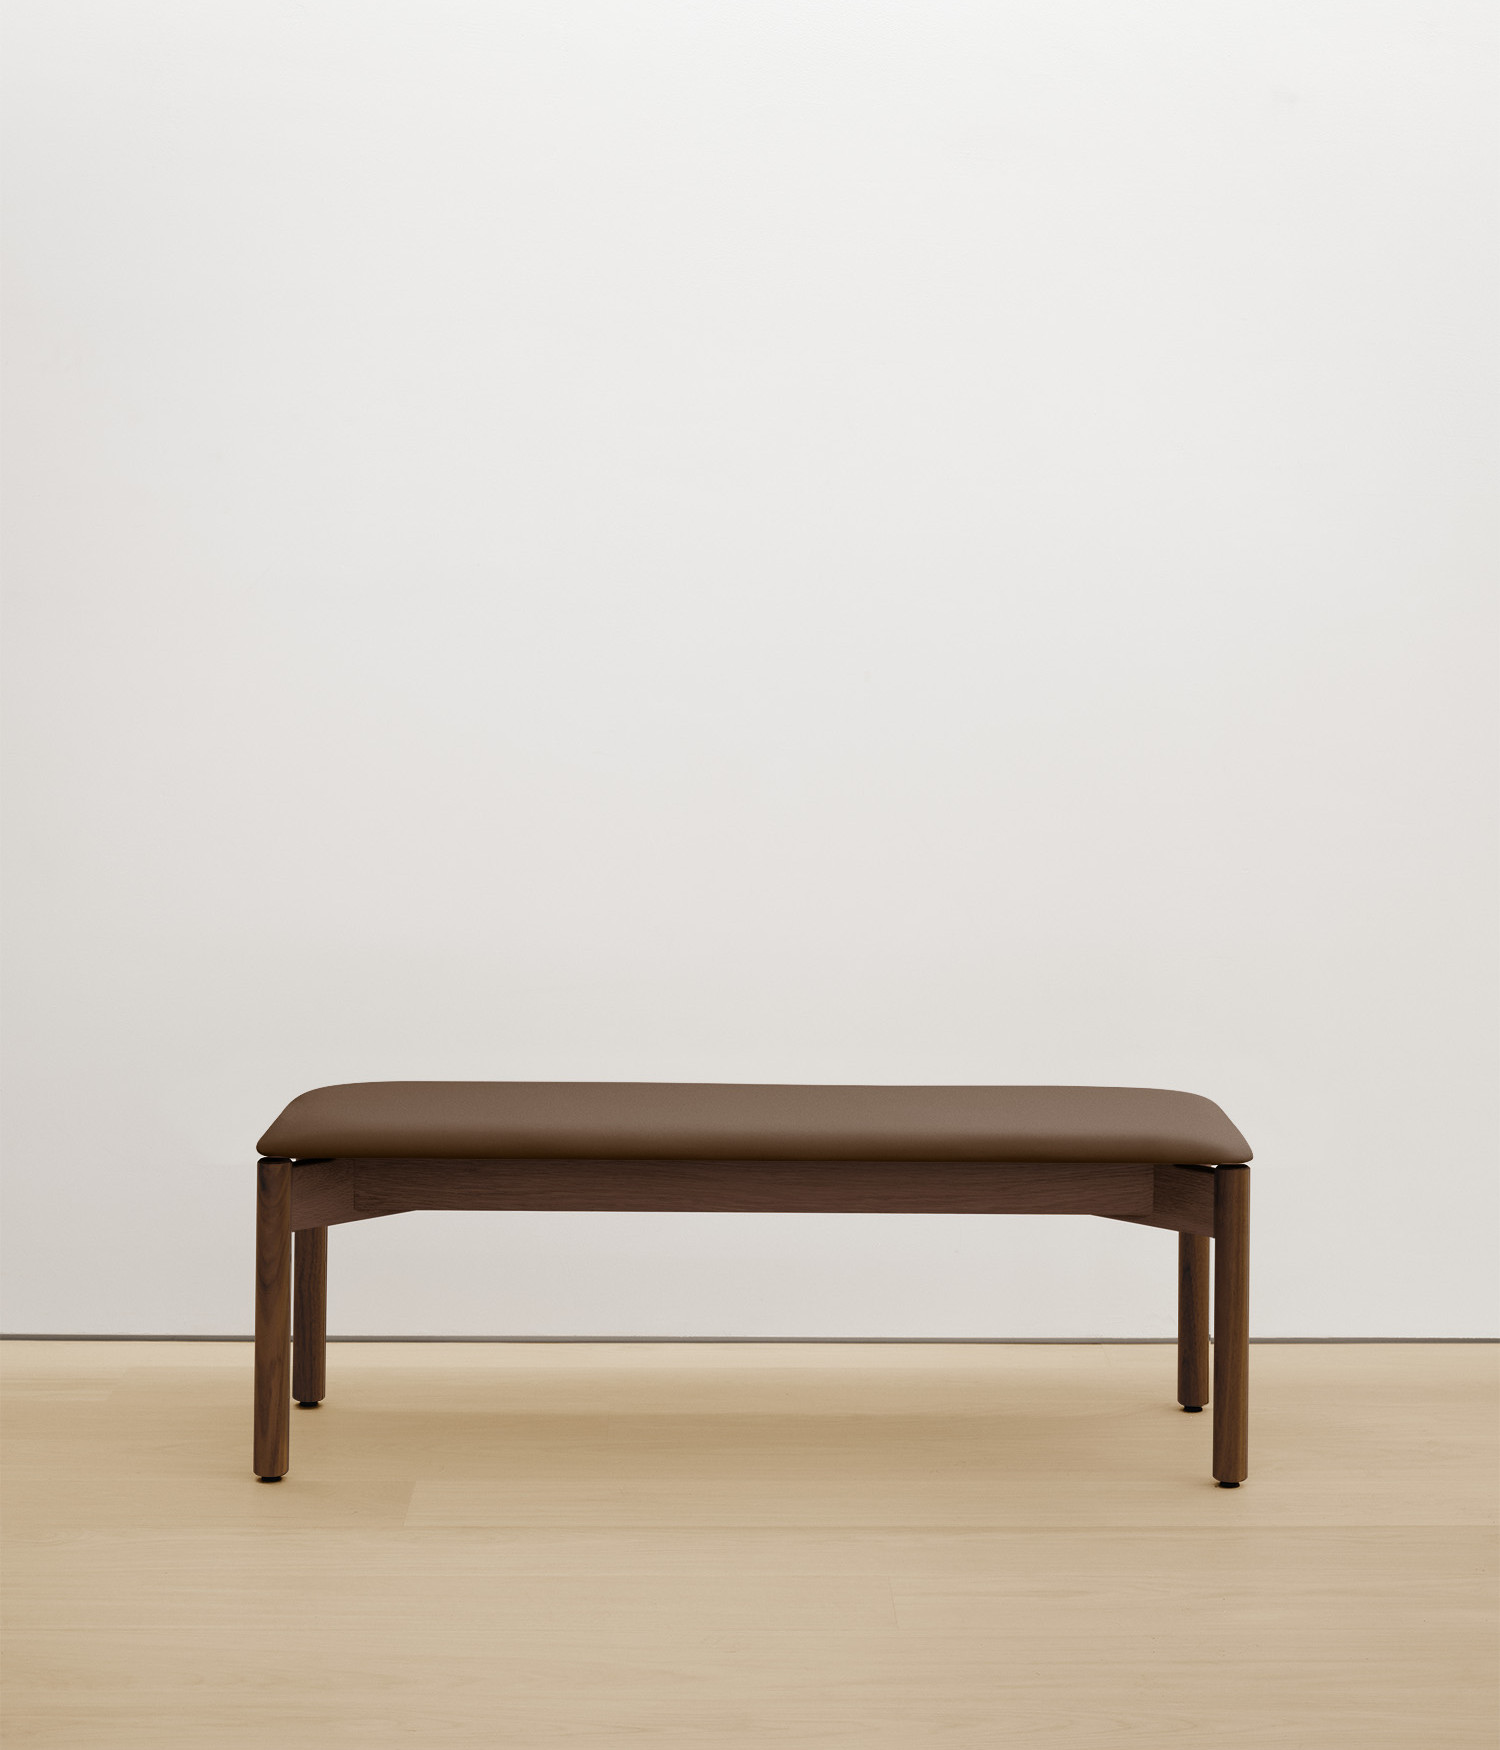  walnut bench with umber color upholstered seat